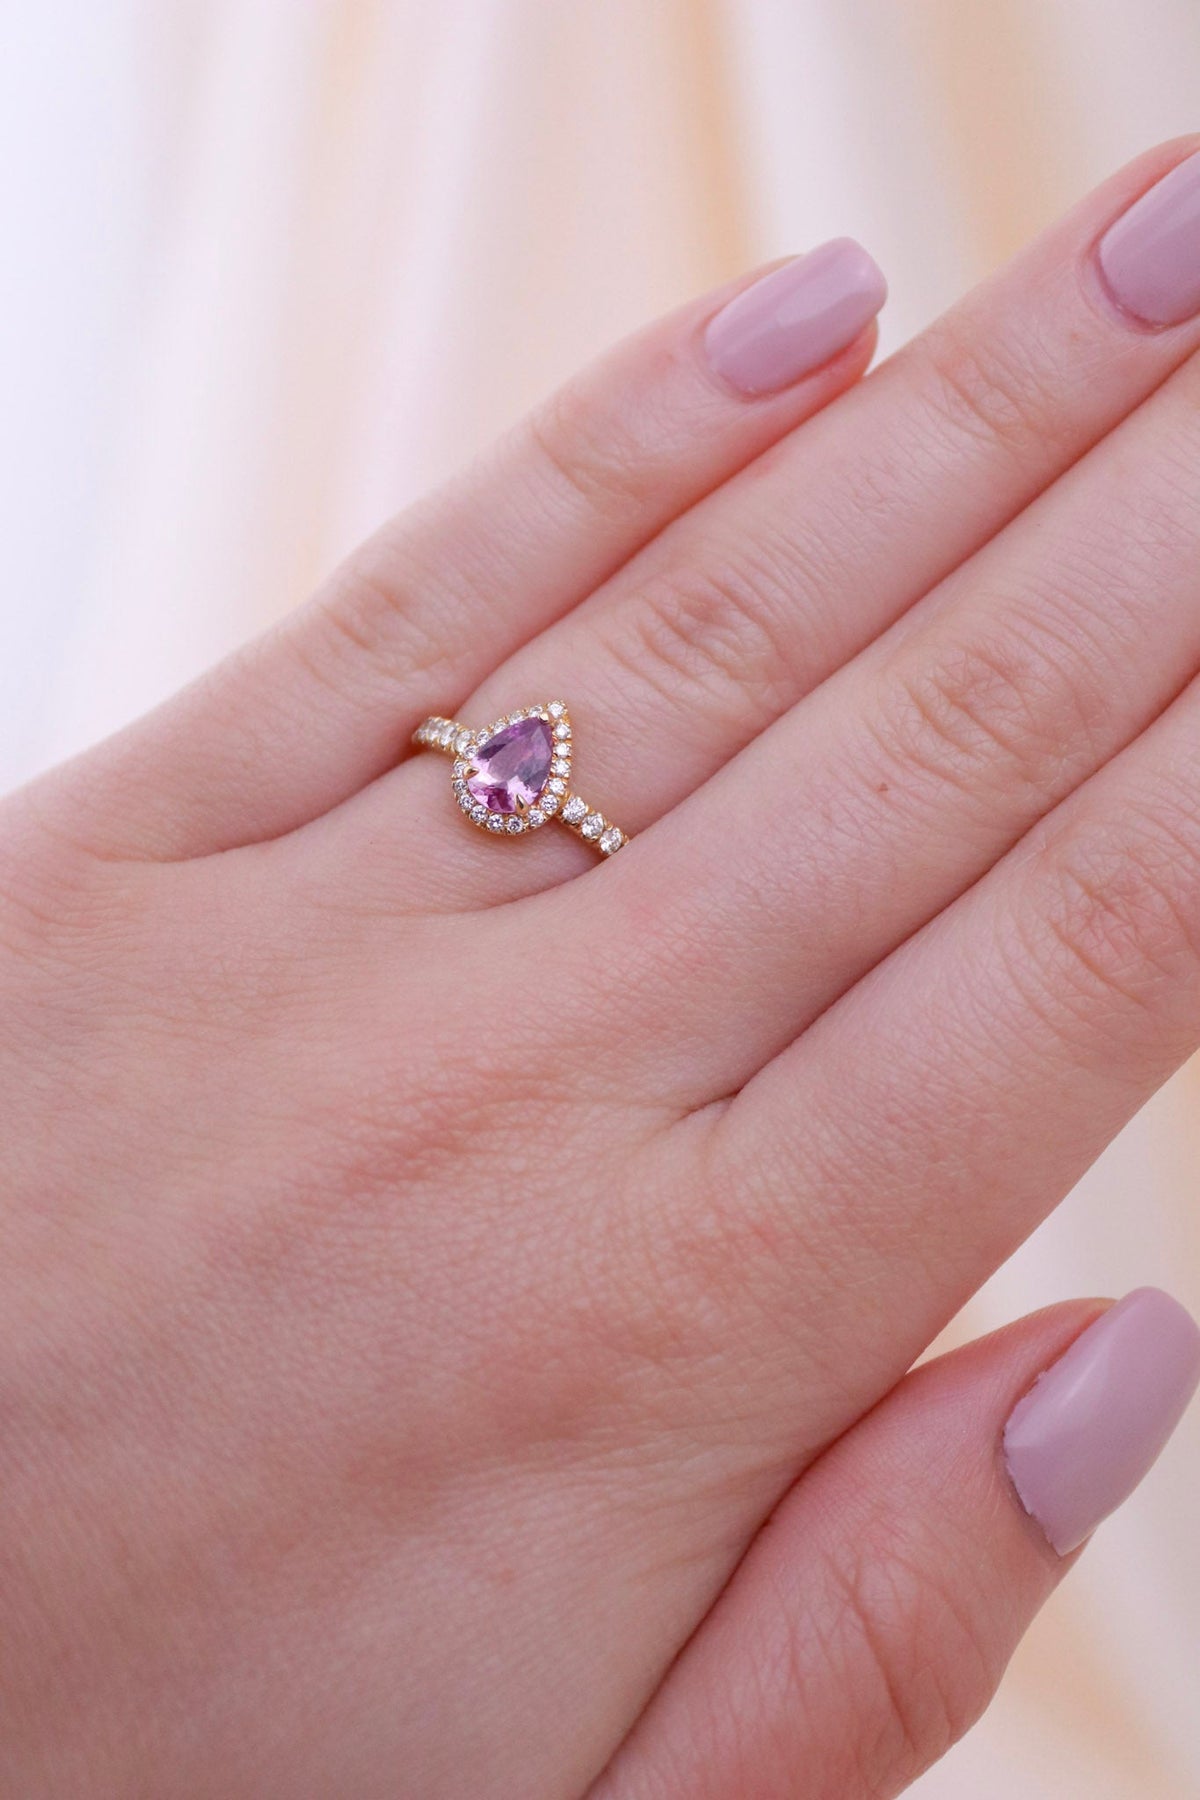 Pink Pear Engagement Ring - Kingdom Jewelry